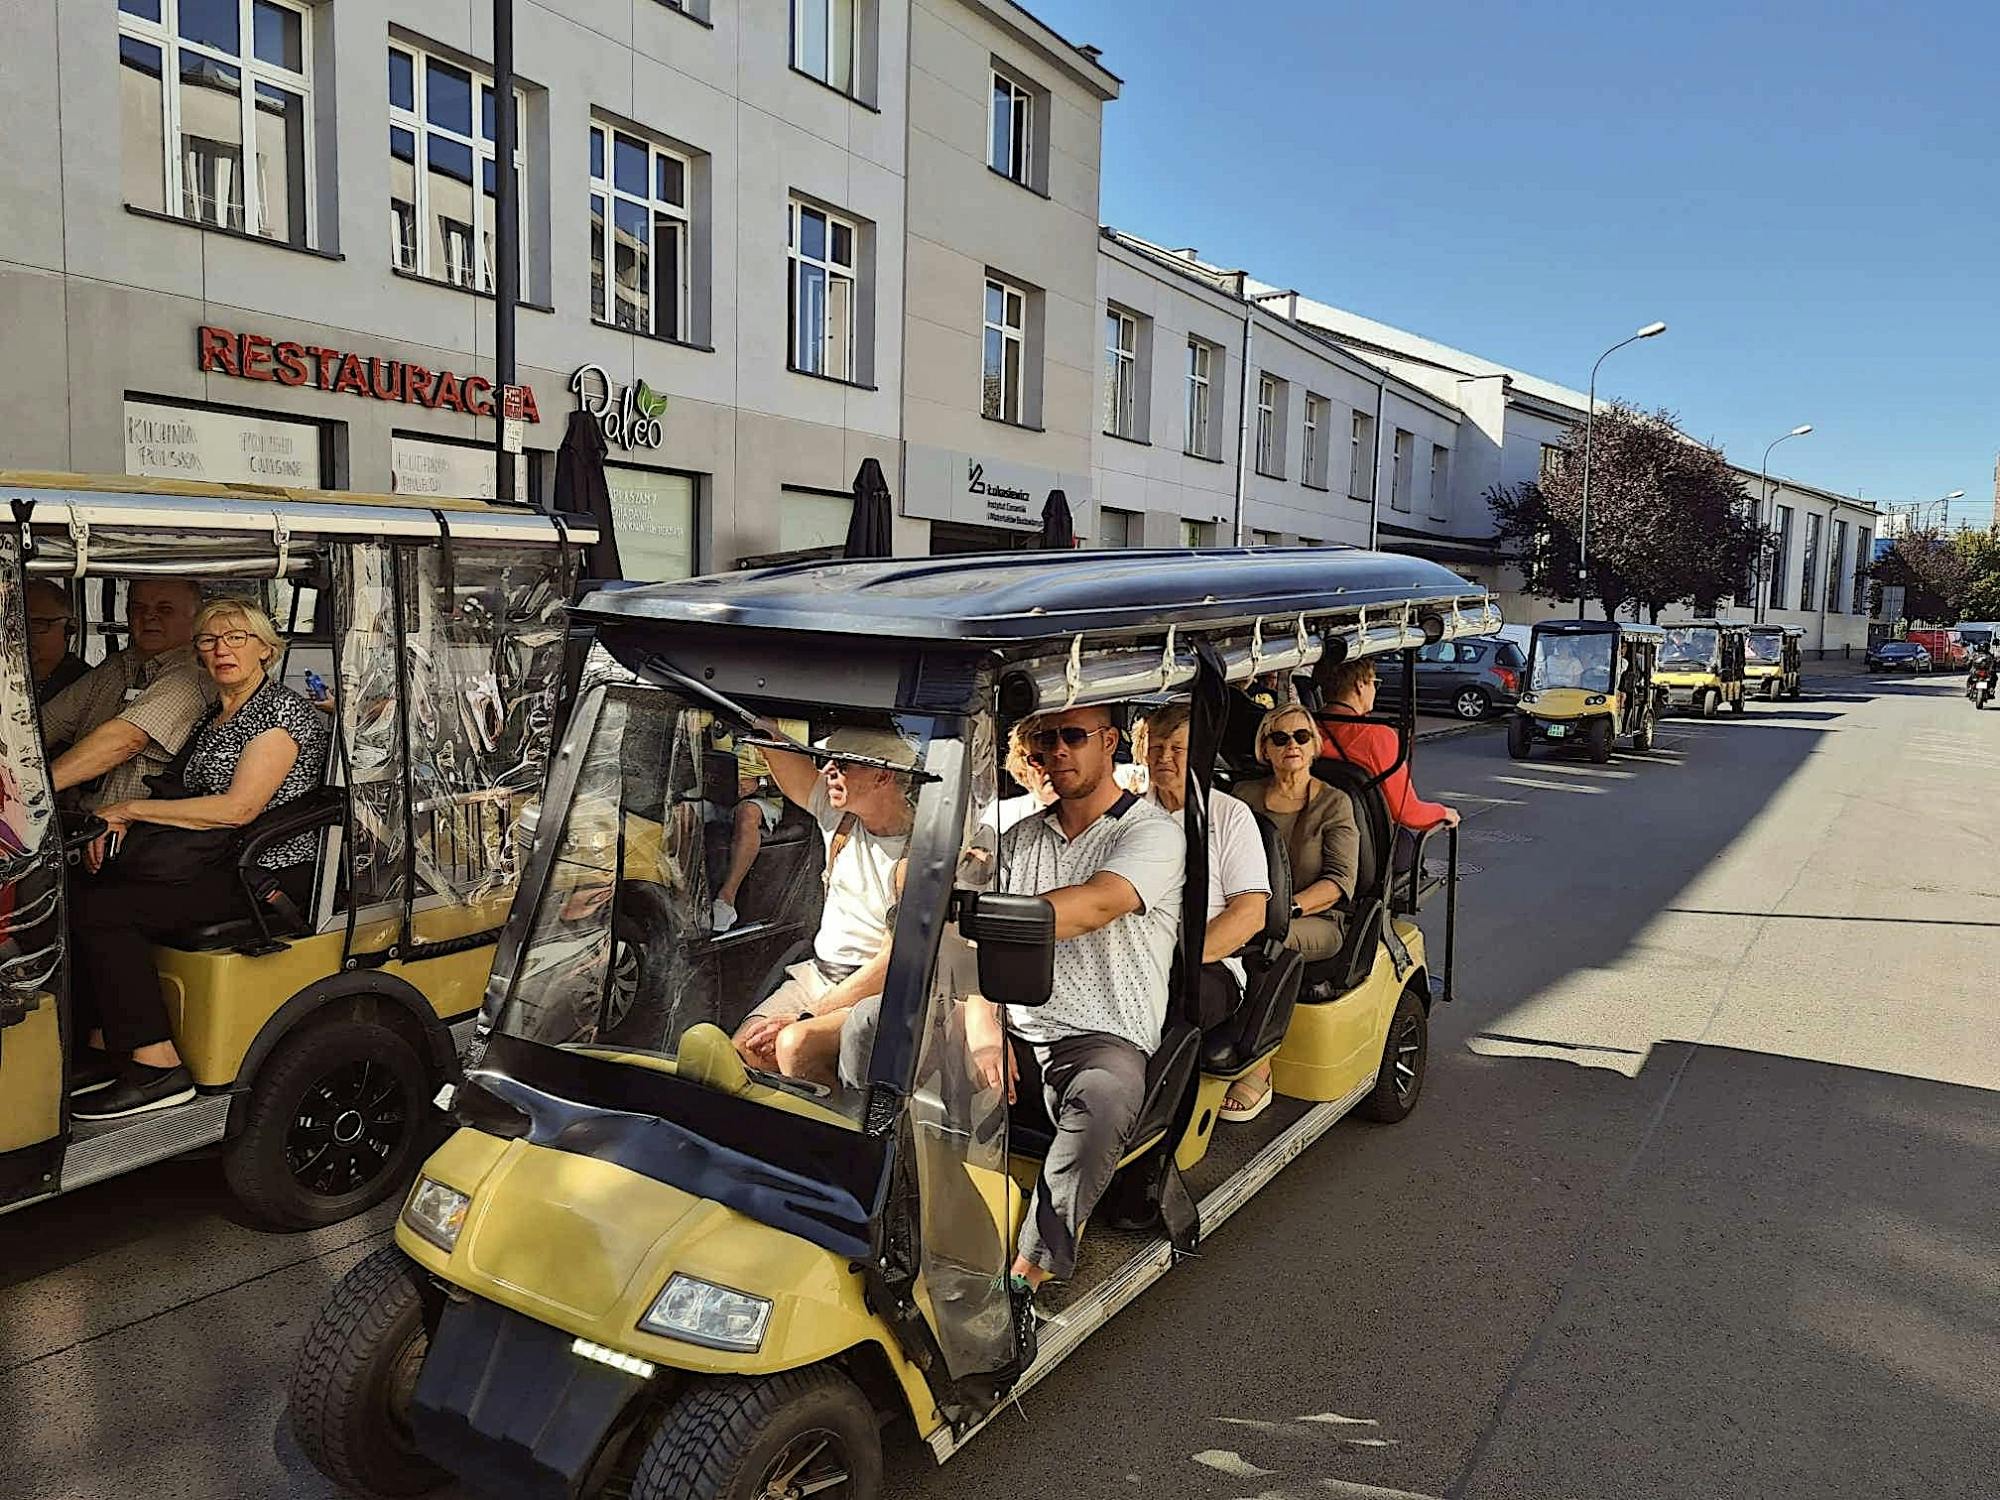 Old Town, Kazimierz and Pogorze private tour in Krakow by golf buggy